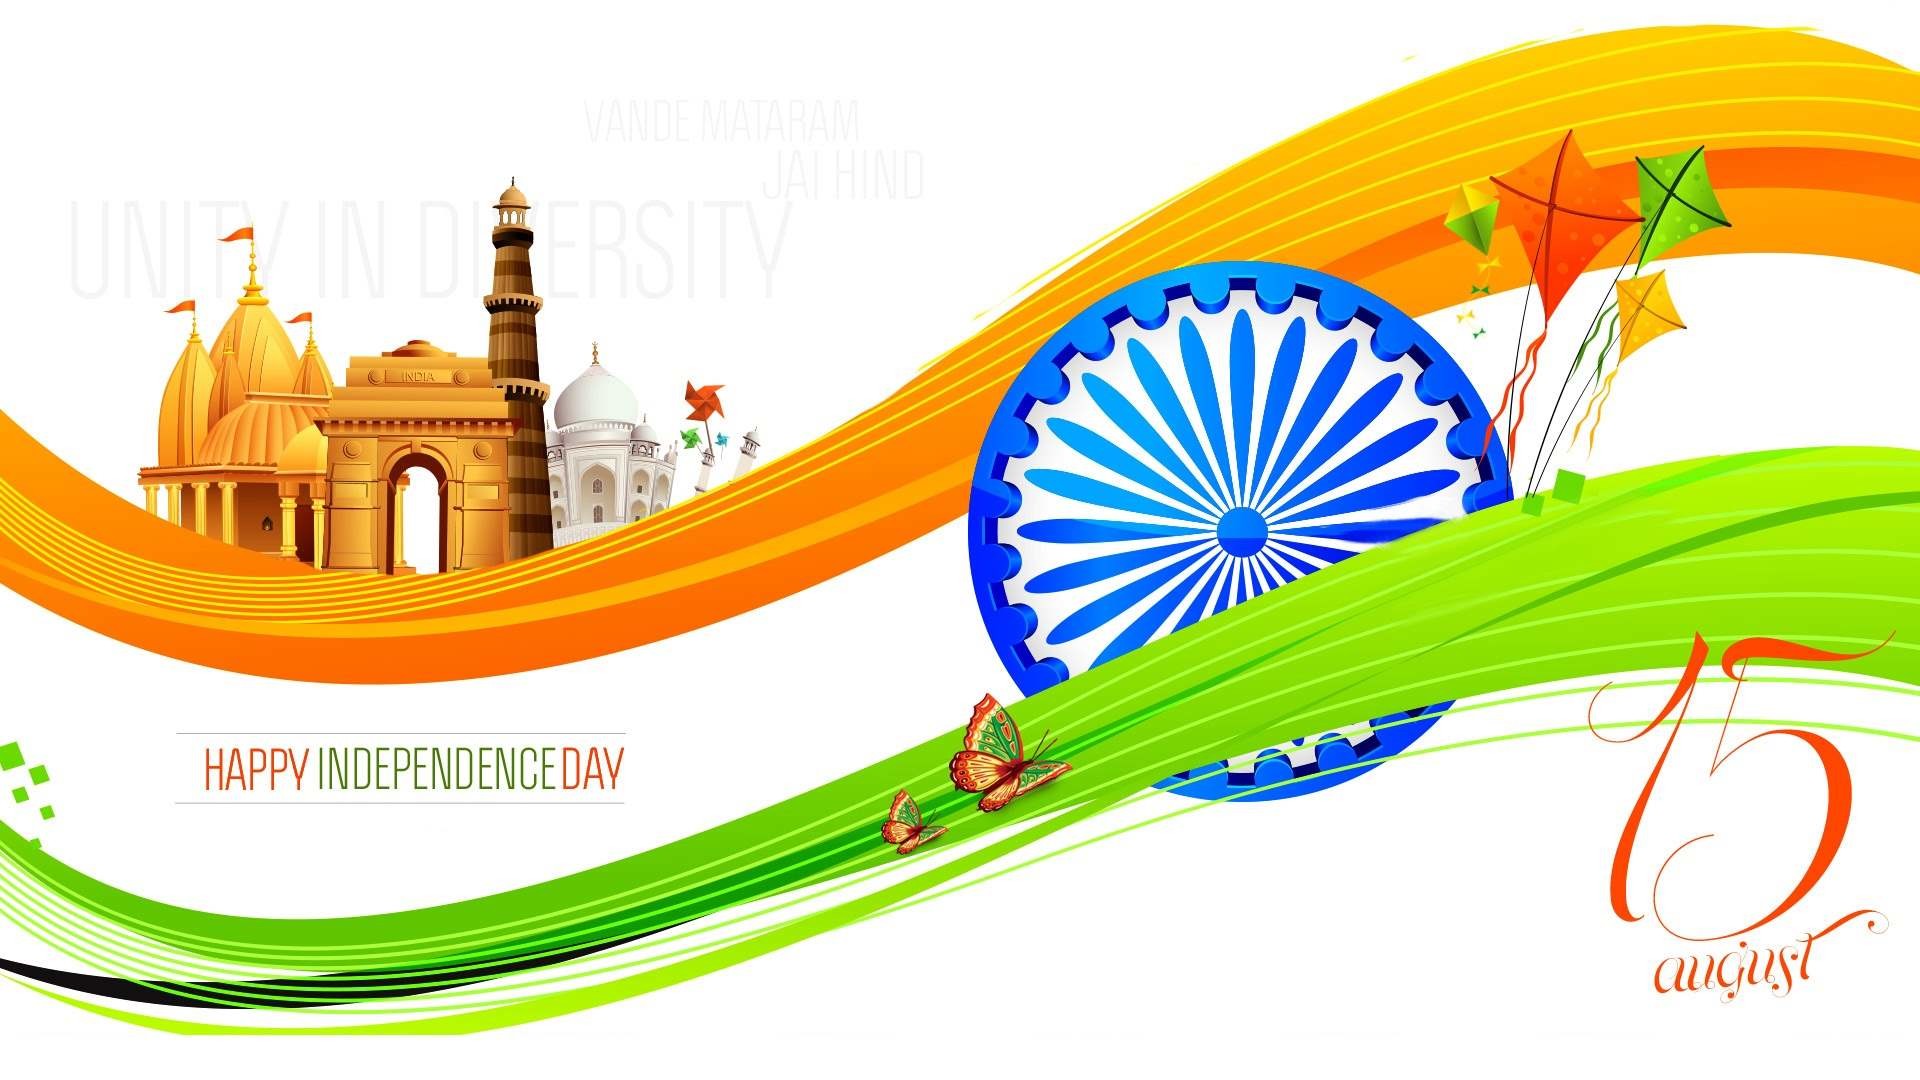 1920x1080 40 Beautiful Indian Independence Day Wallpapers and Greeting cards | Indian  flag, Indian flag images and Wallpaper